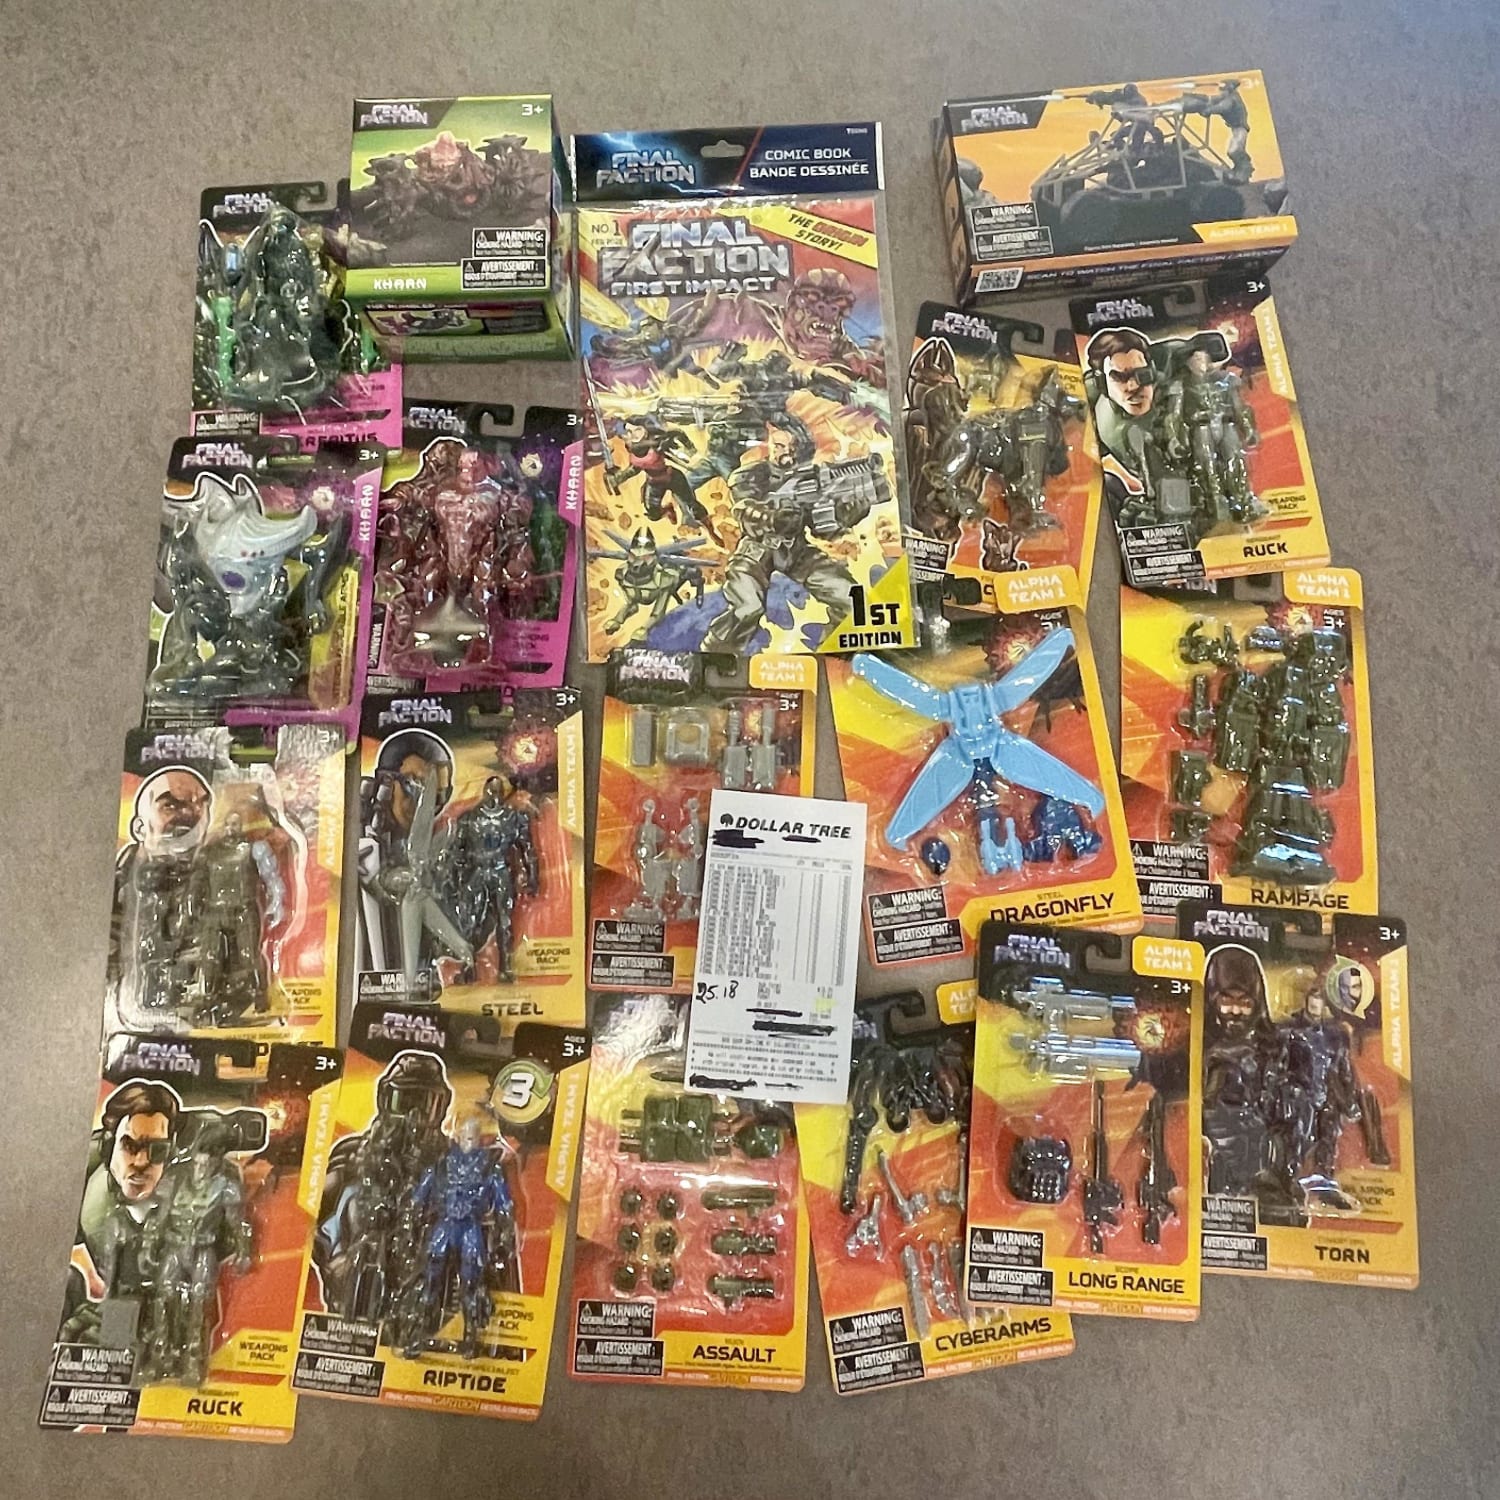 I enjoy my Legends, Legos, McFarlane, NECA, etc. as much as the next guy (or girl) but like I told the Dollar Store cashier, “purchased all these for a boys birthday party.” Price? One Marvel Legend. “Final Faction” action figure haul?